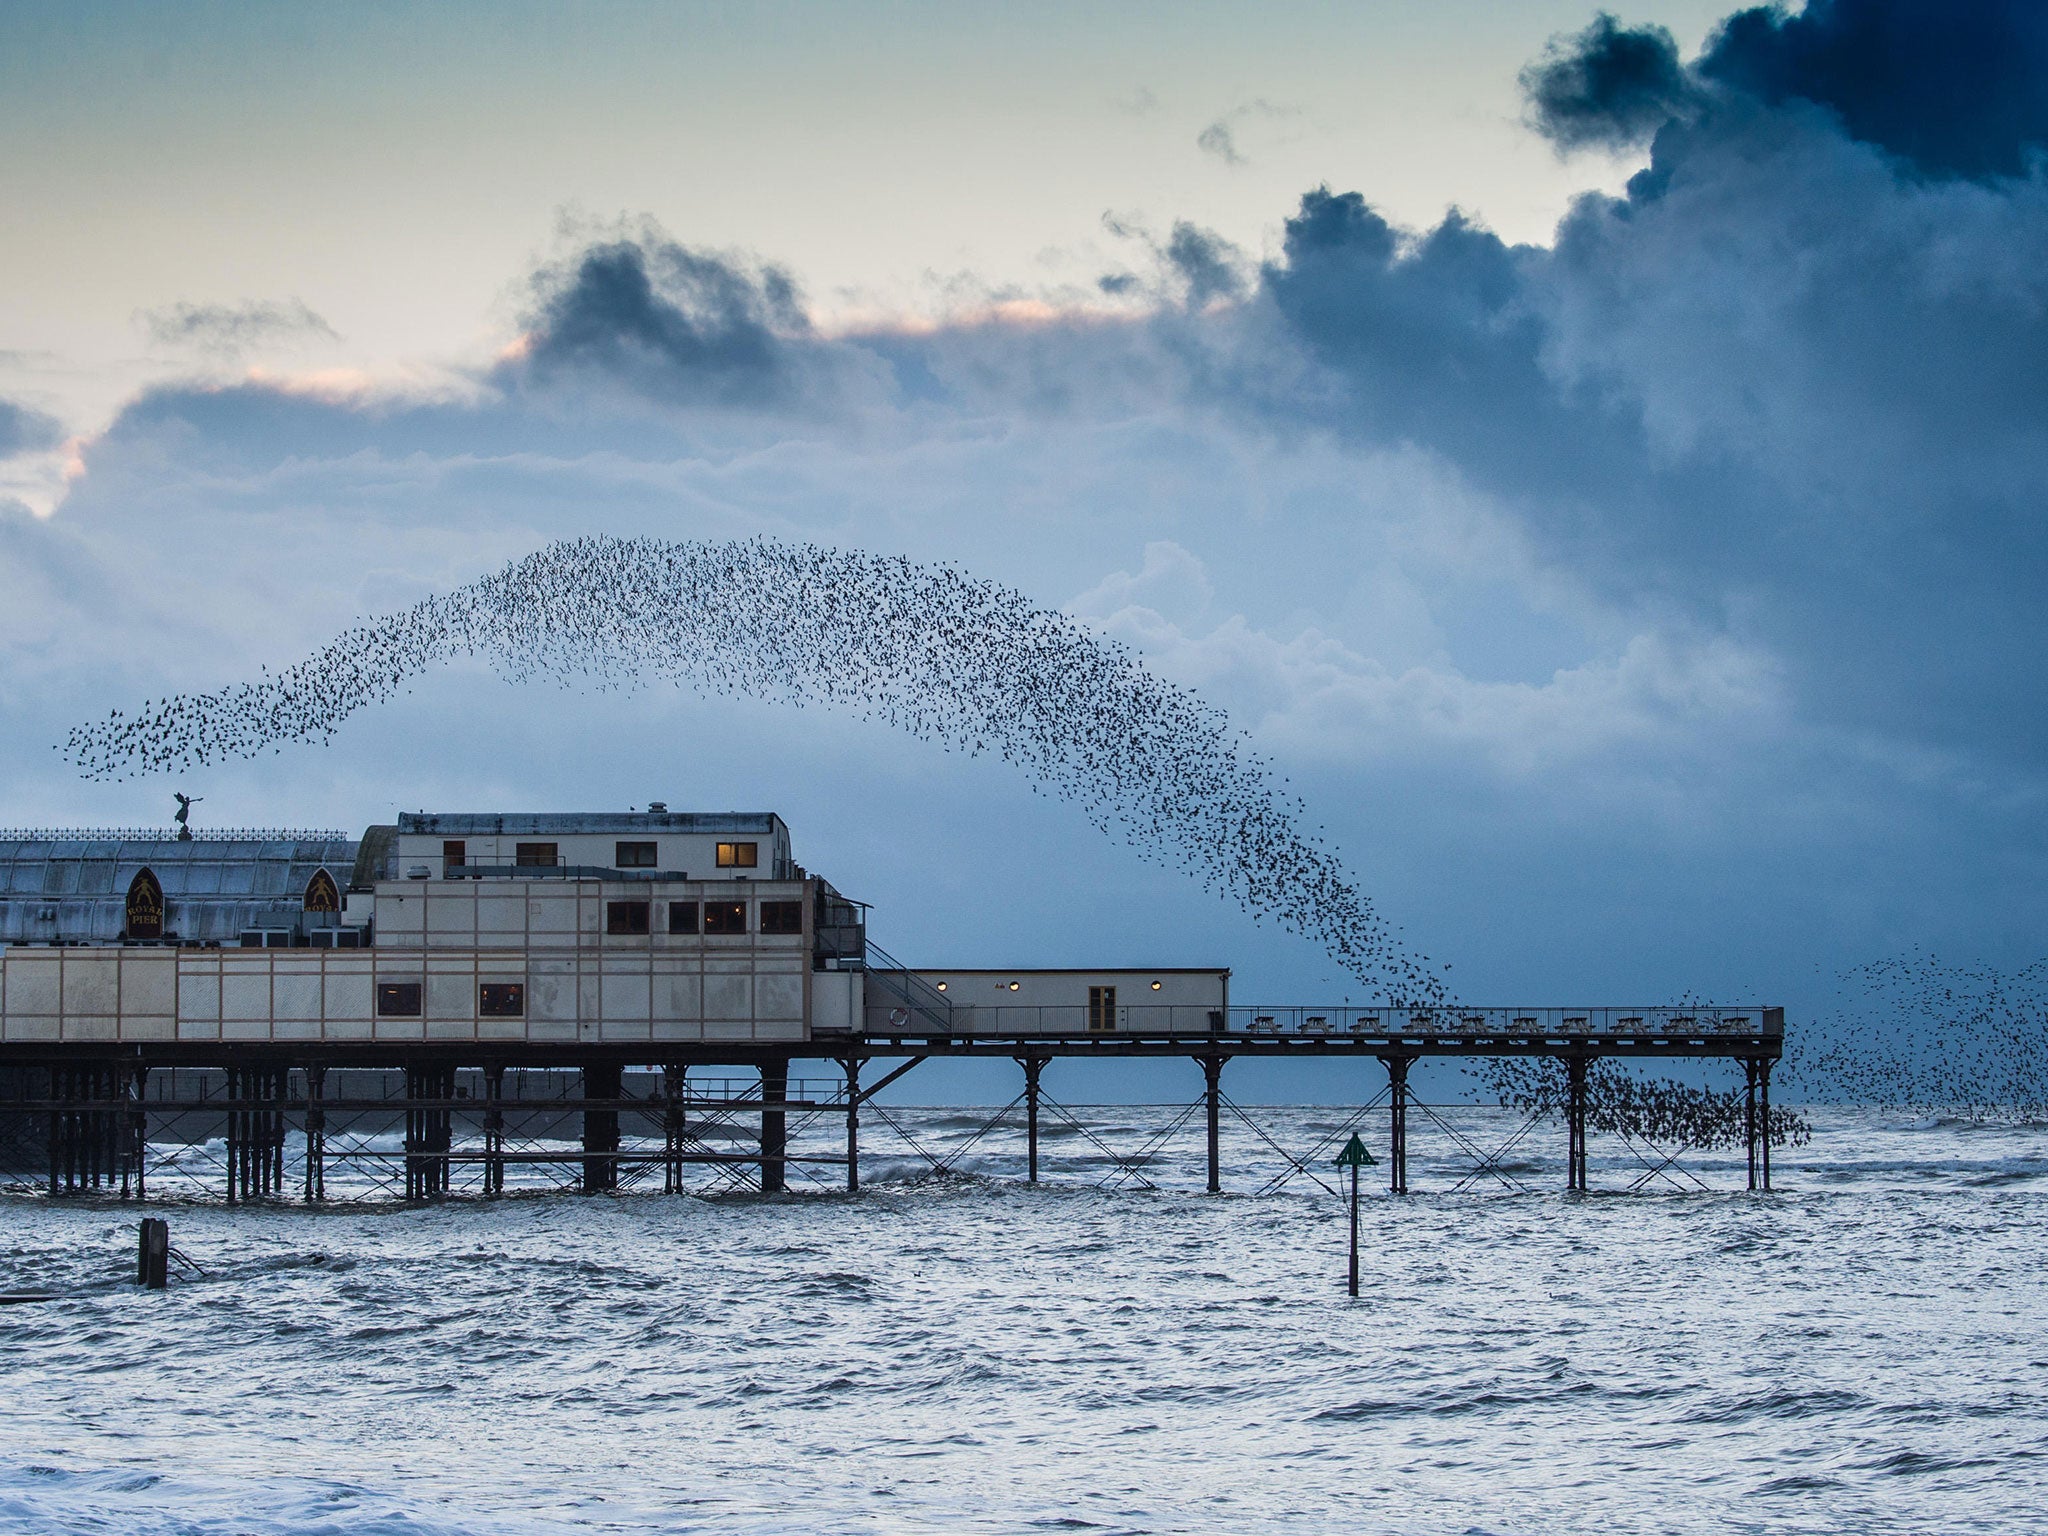 A murmuration of starlings comes in to settle on the legs of Aberystwyth Pier